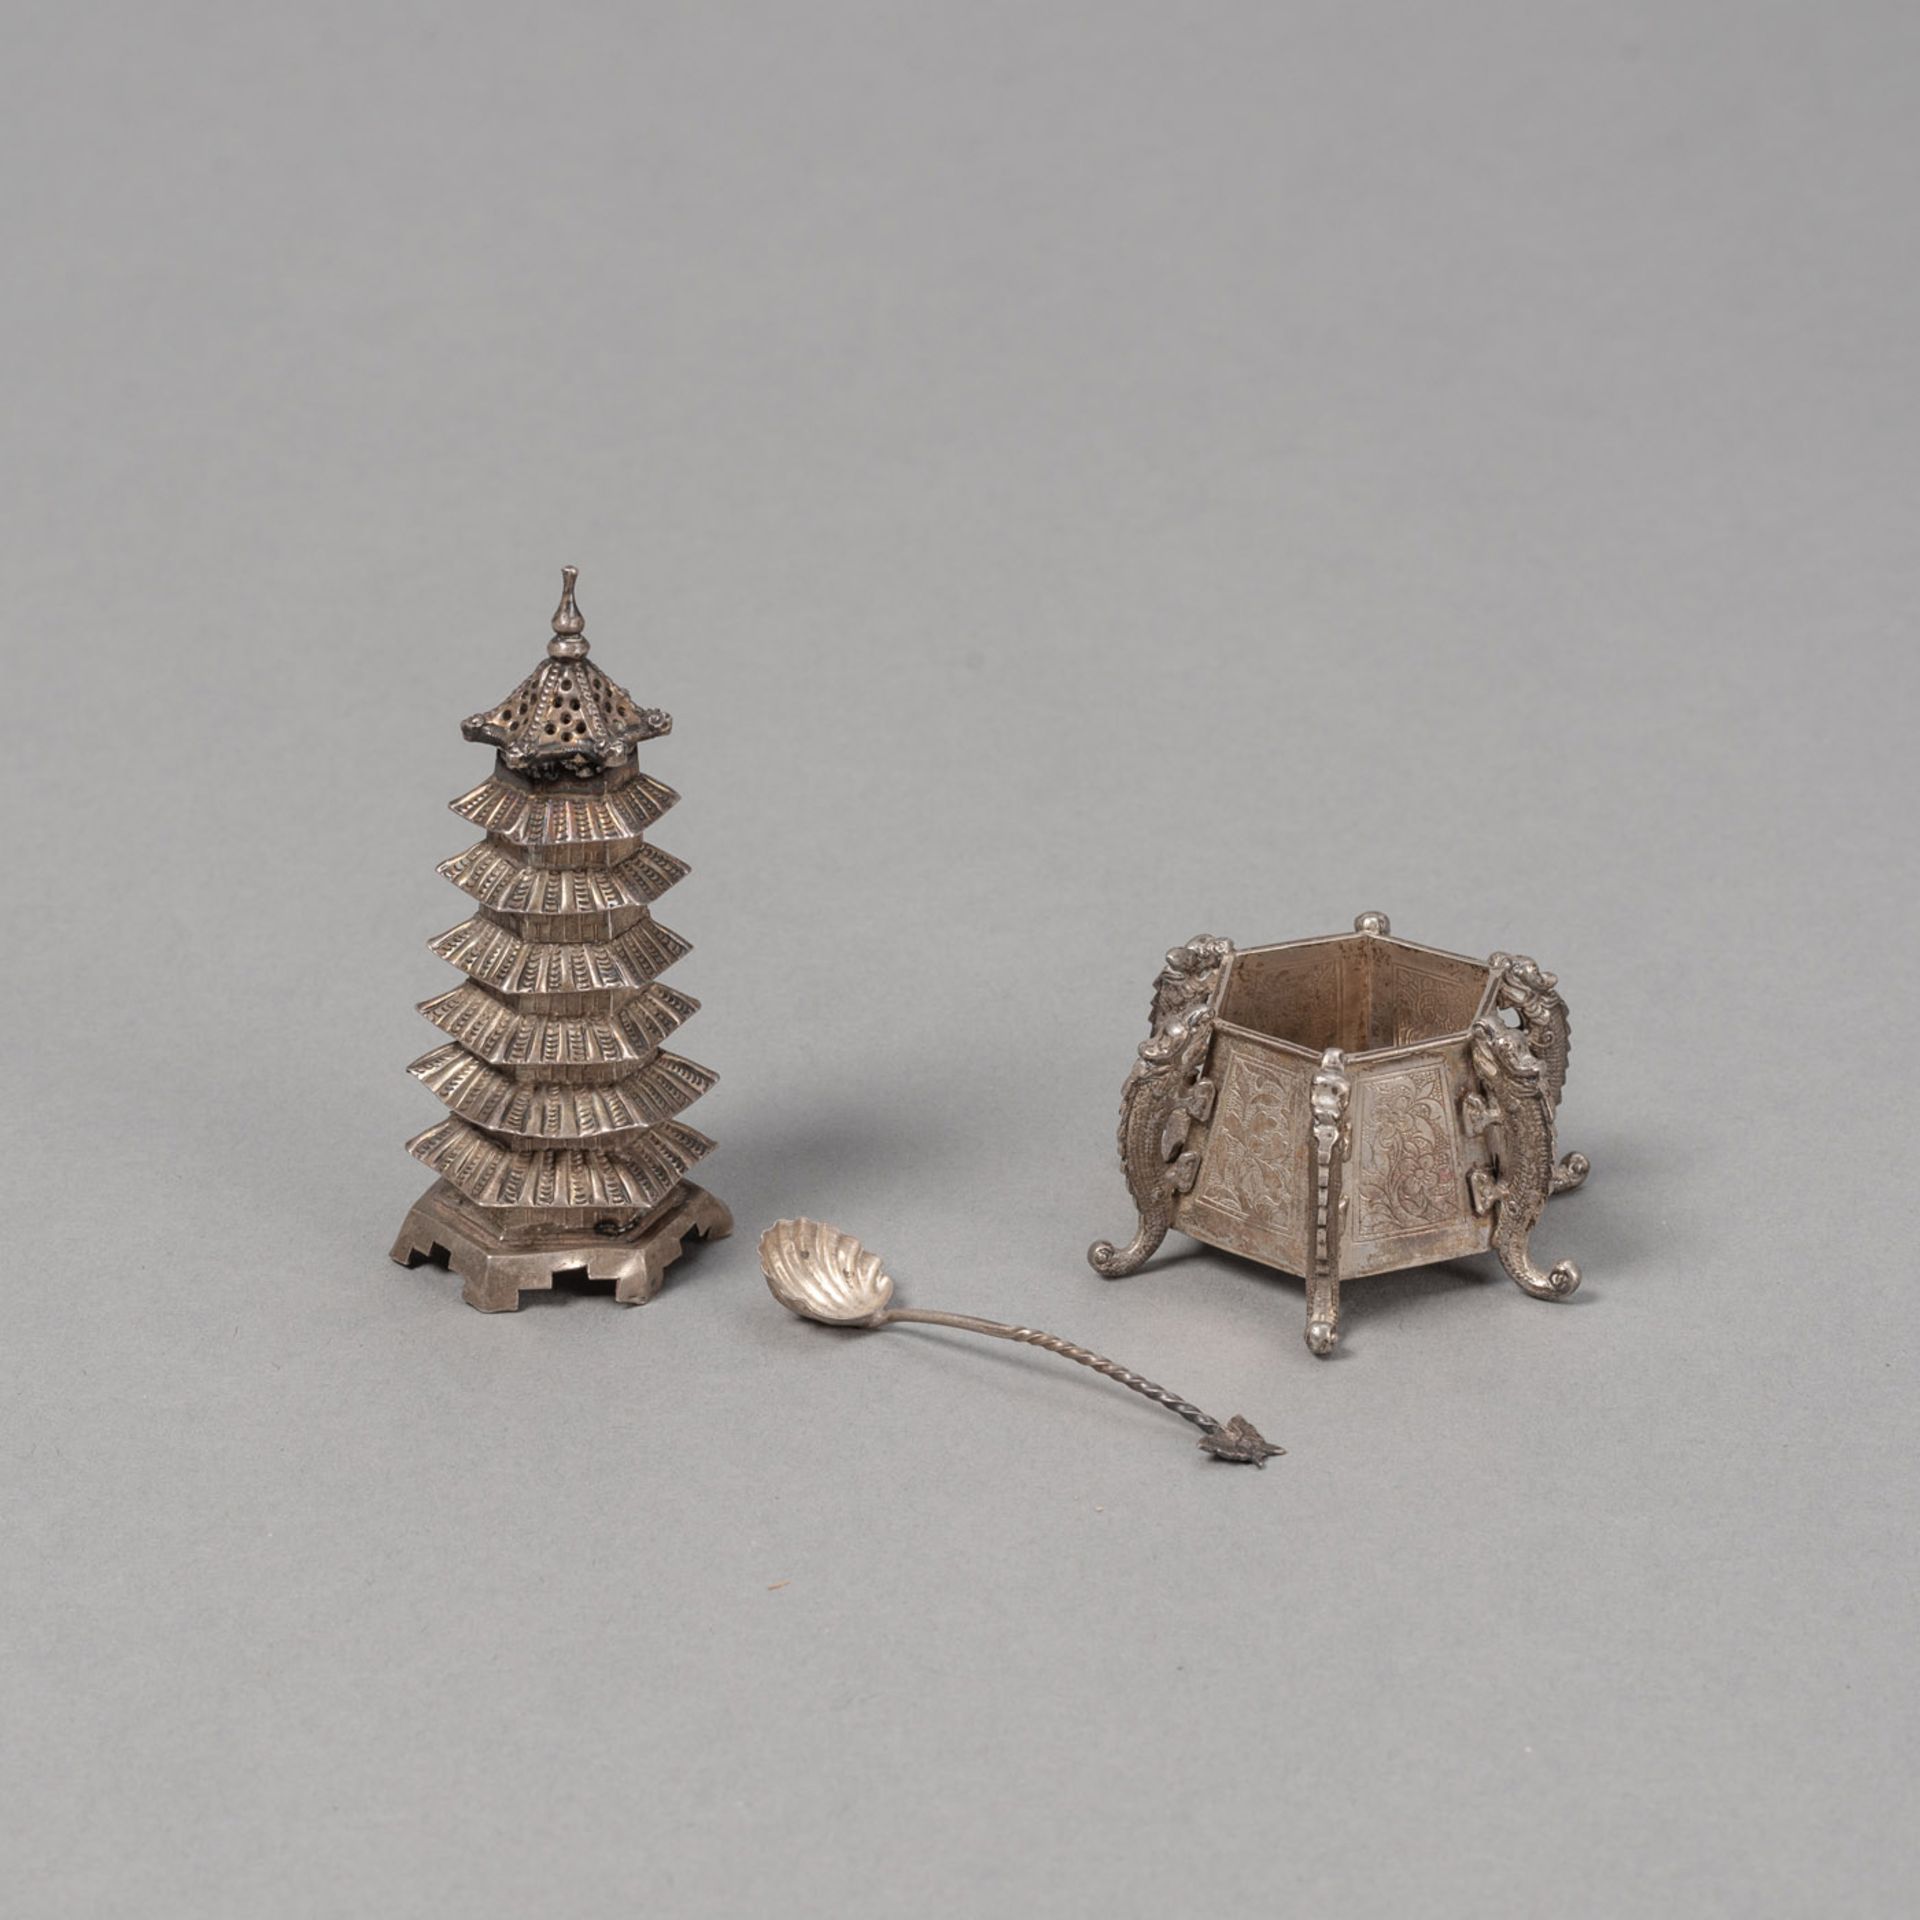 A SILVER SALT SHAKER IN THE SHAPE OF A PAGODA WITH COVER AND A SMALL BOWL WITH A SPOON